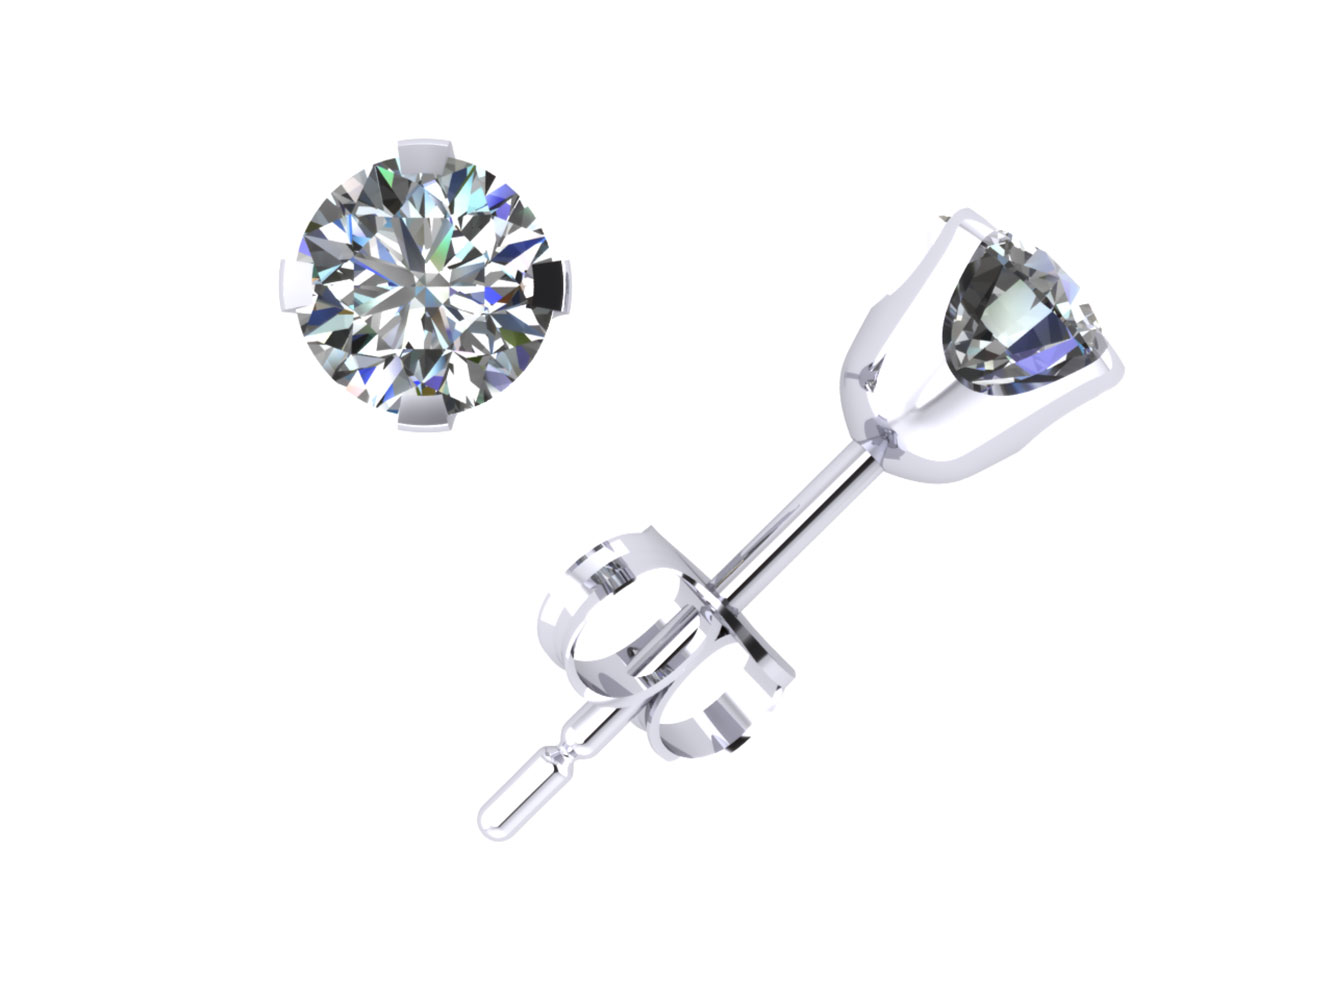 Jewel We Sell Genuine 2/5Ct Round Diamond Stud Earrings 10k White or Yellow Gold Prong Push Back H SI2